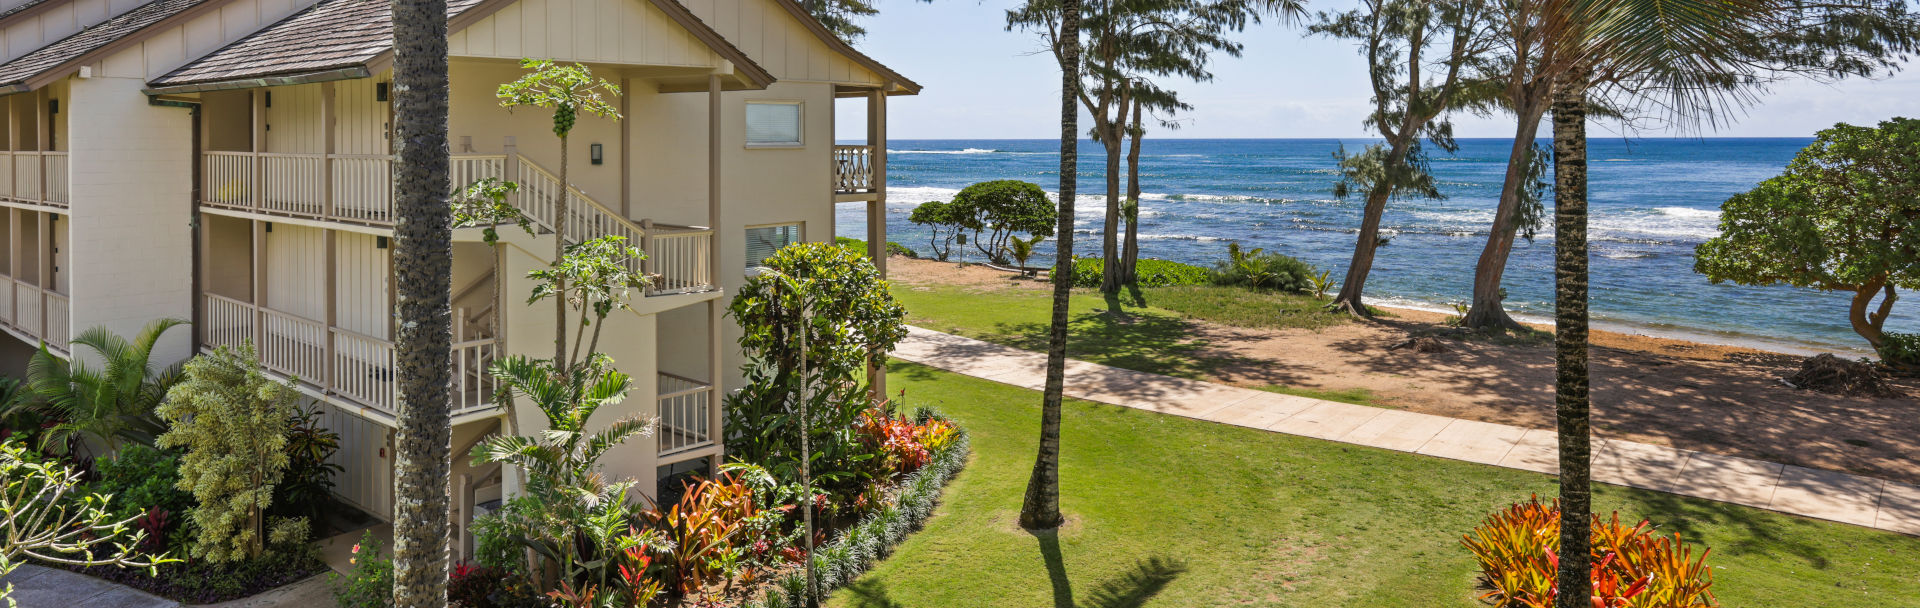 Aston Islander on the Beach with lush landscaped grounds and just steps from the beach